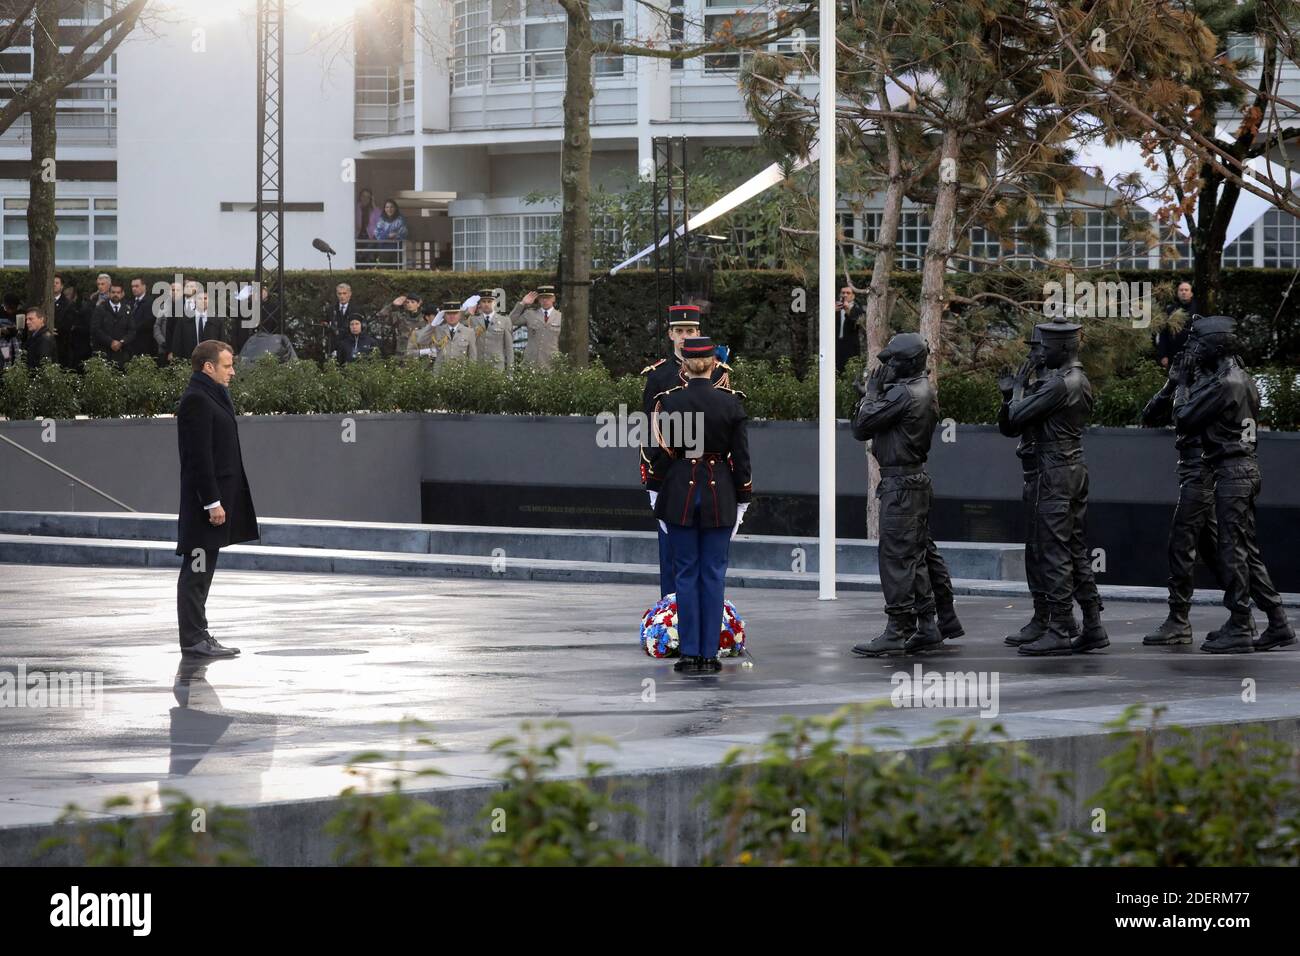 French President Emmanuel Macron (L) pays his respects in front of the 'Monument aux morts pour la France en operations exterieures' (OPEX) by French artist Stephane Vigny during its official inauguration on November 11, 2019 in the Eugenie-Djendi garden in Paris, as part of commemorations marking the 101st anniversary of the 11 November 1918 armistice, ending World War I. Photo by Ludovic MARIN/Pool/ABACAPRESS.COM Stock Photo